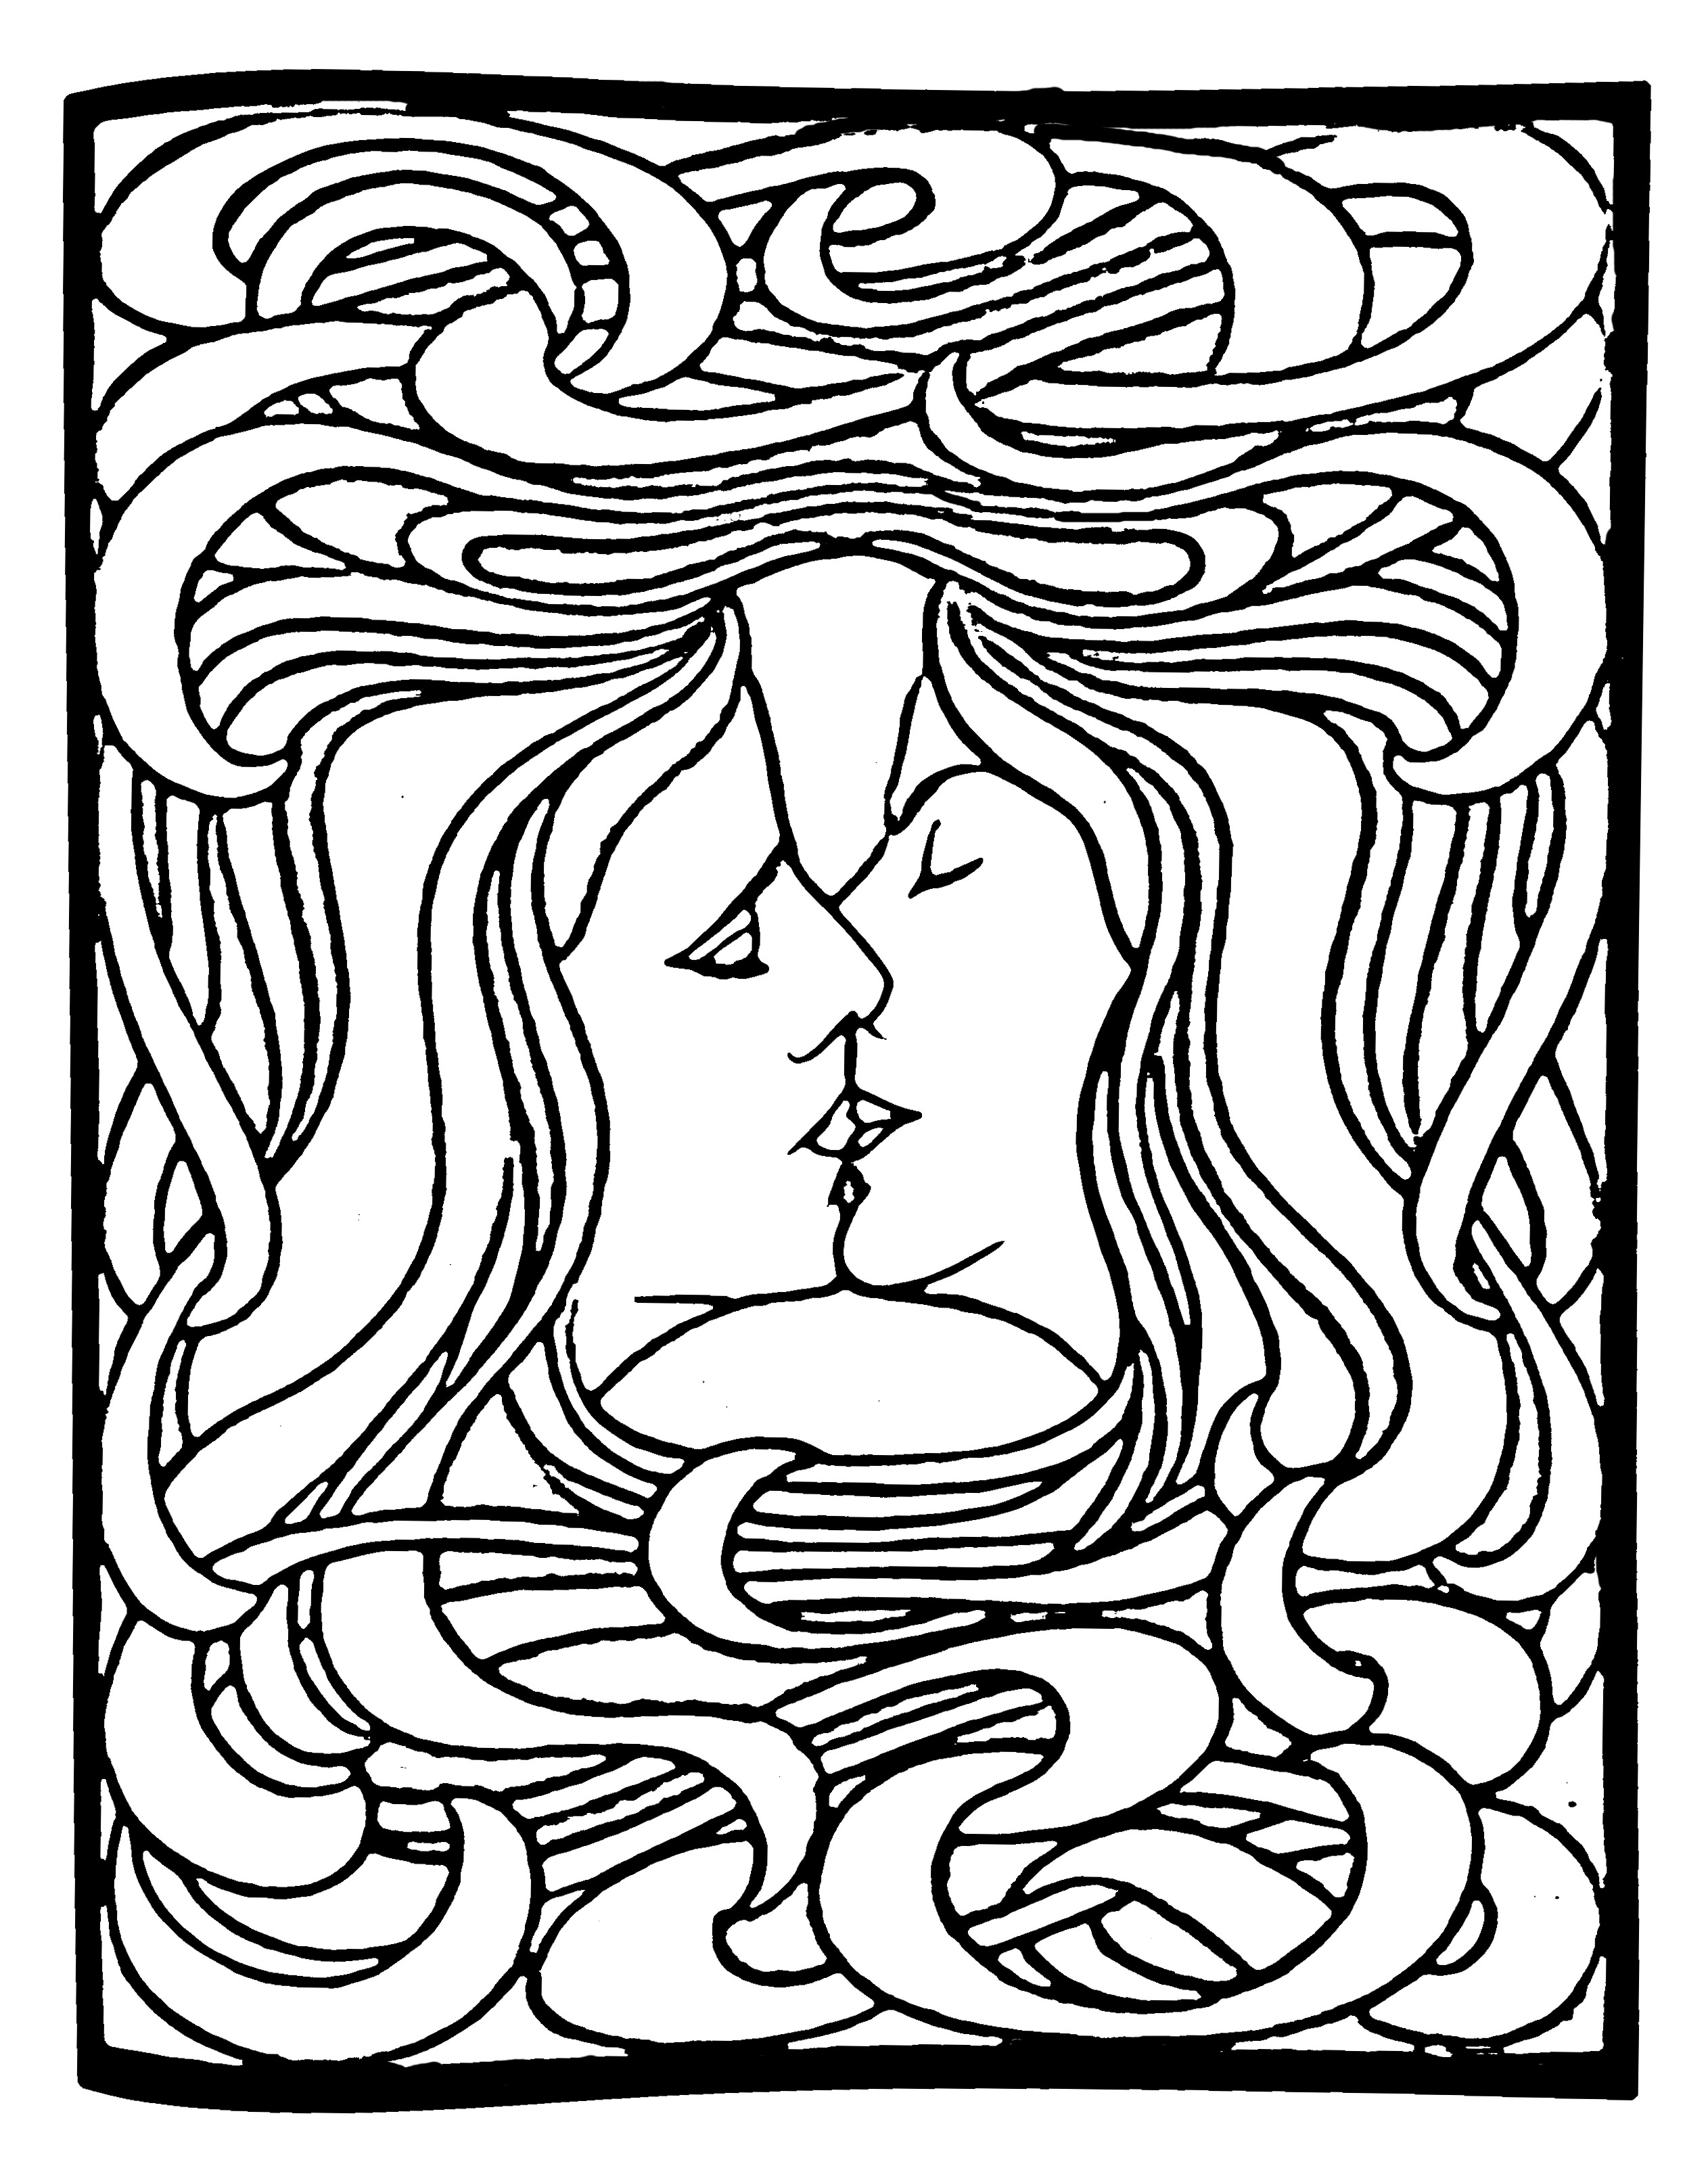 Coloring page from 'Le Baiser' by Peter Behrens (1898). Two women kissing, tangled hair